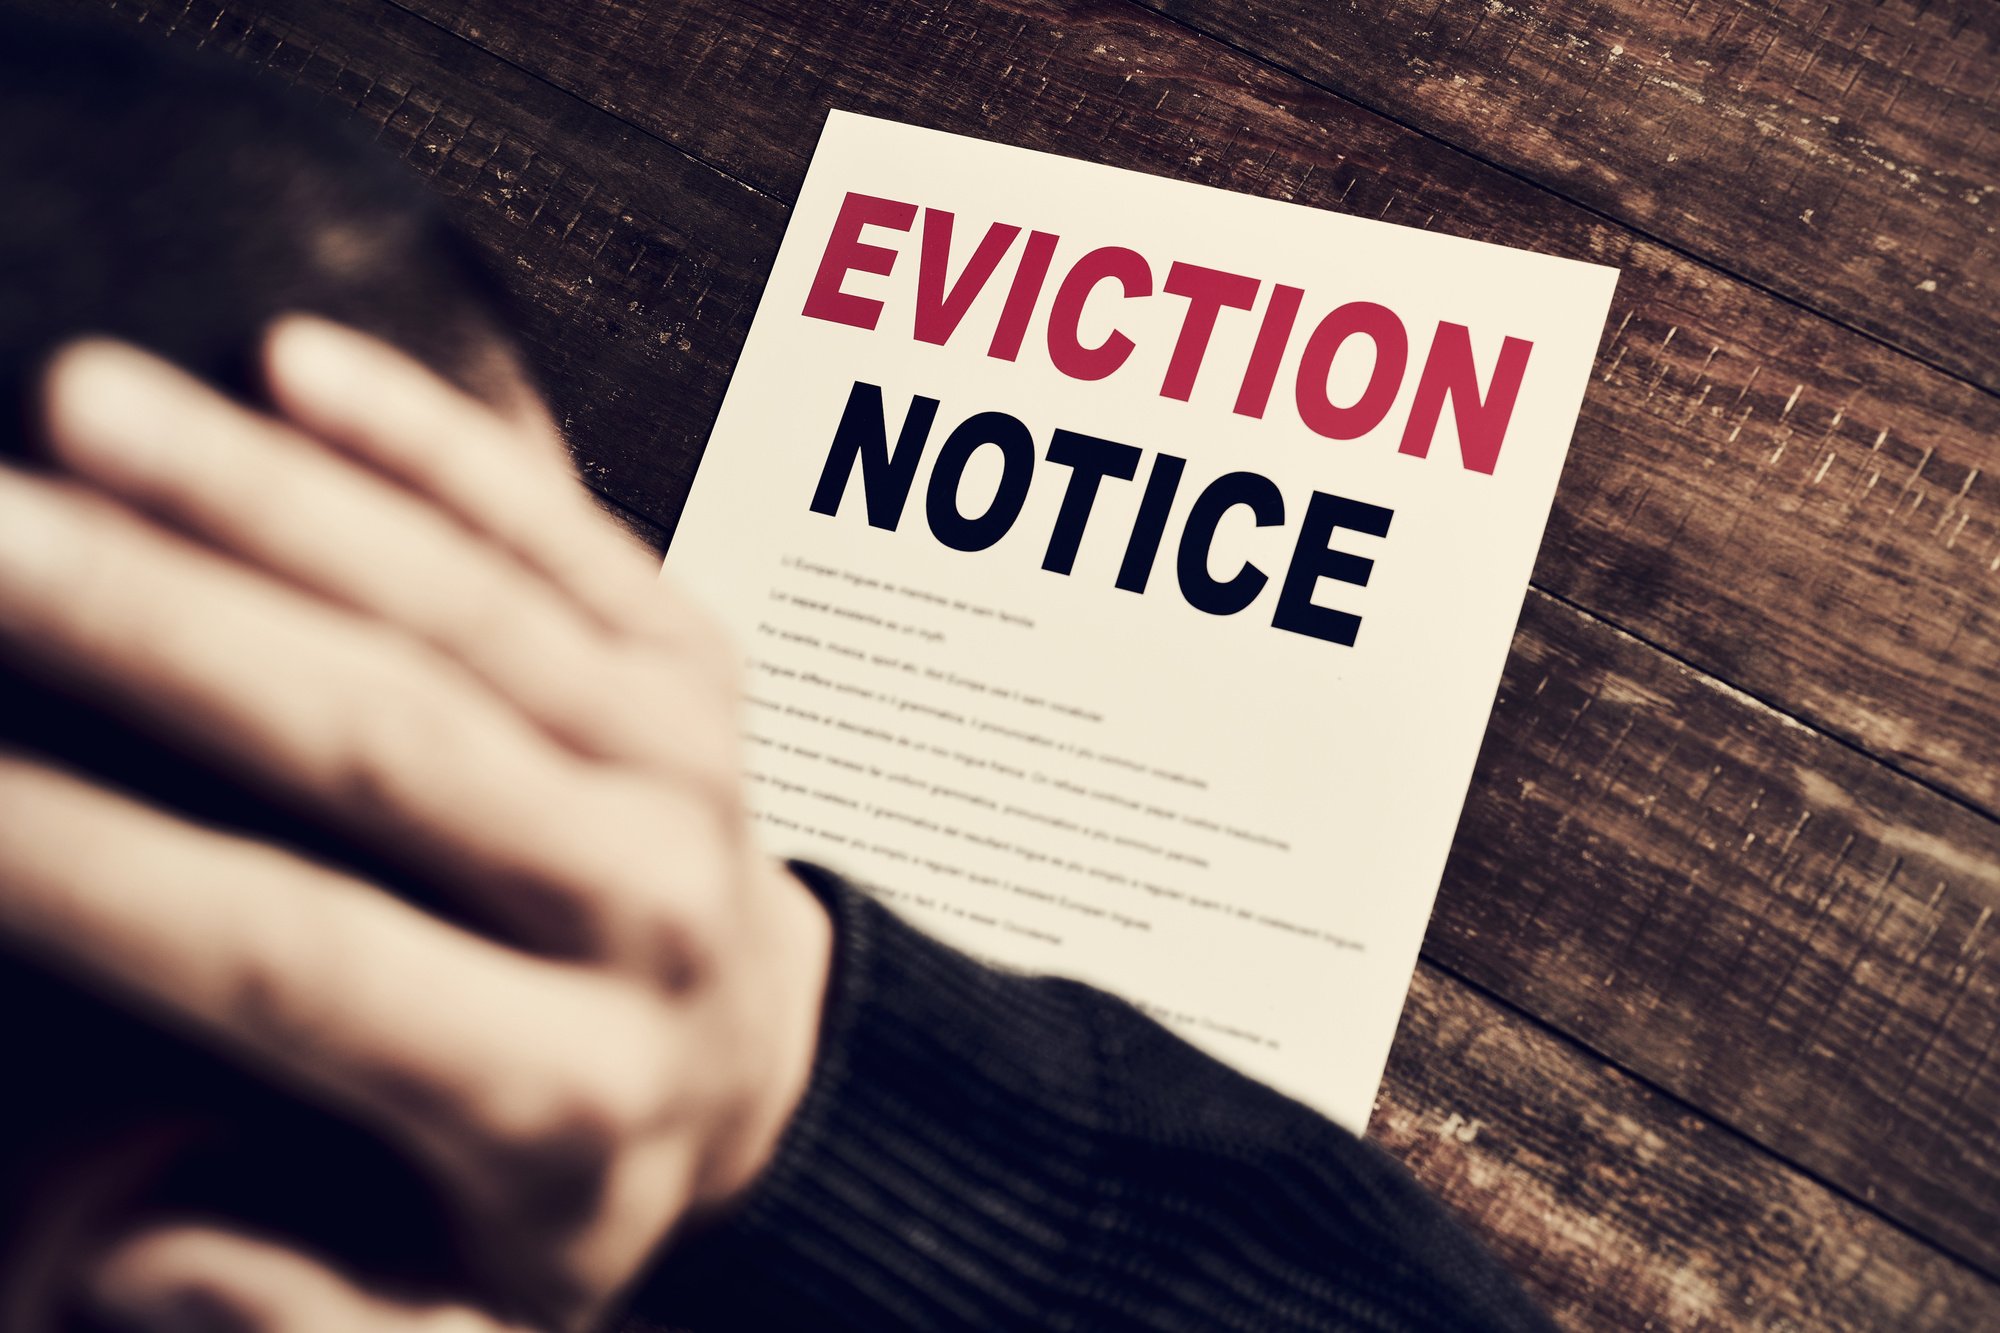 Eviction Letter Sample: How to Draft the Perfect Eviction Notice